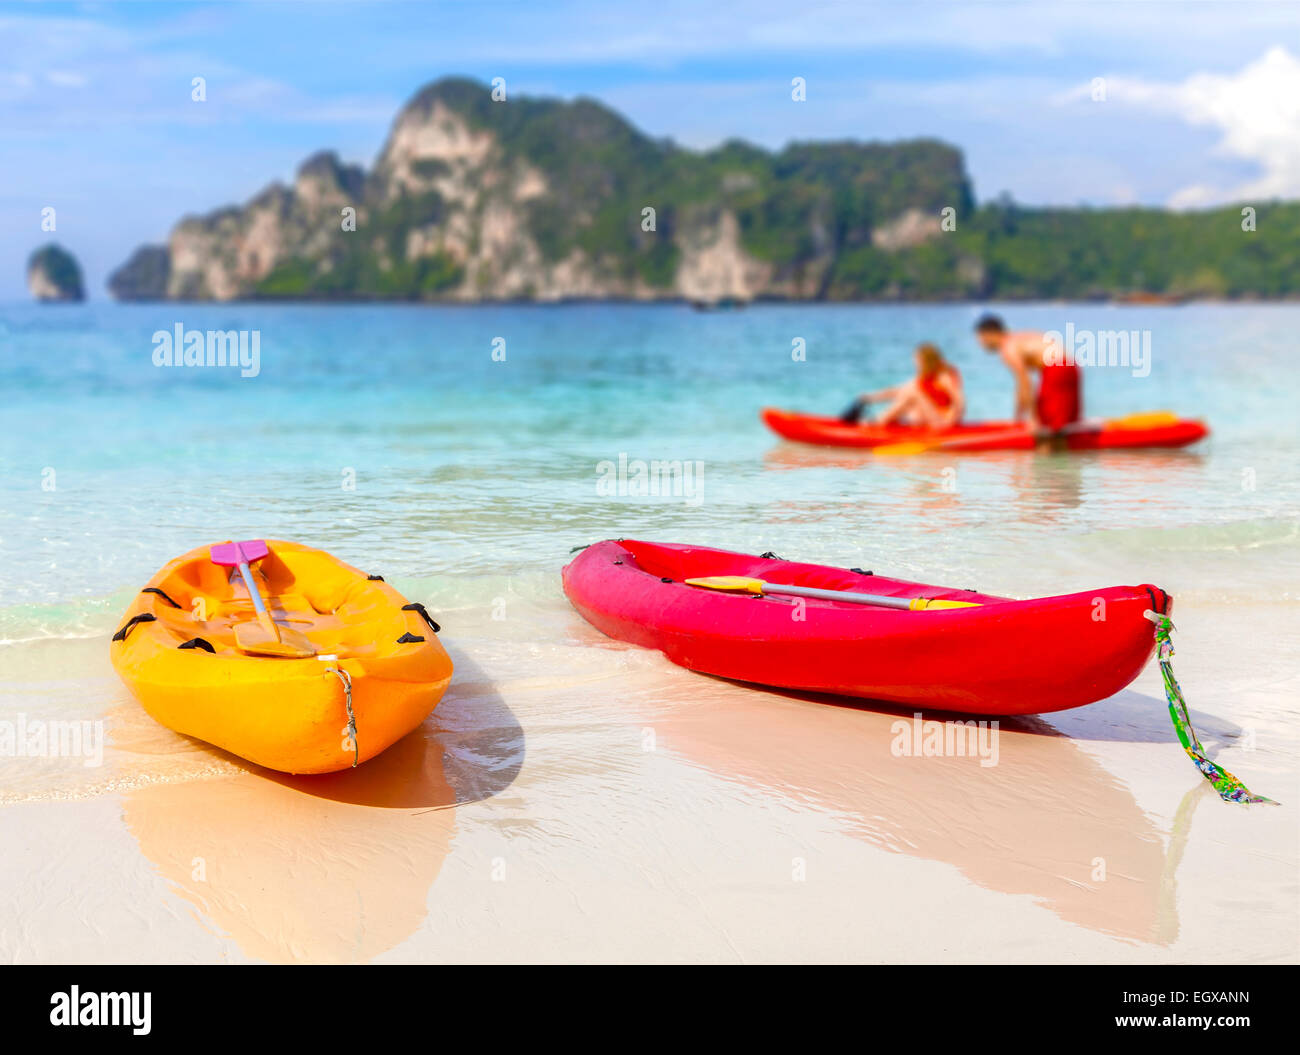 Kayaks on a tropical beach, shallow depth of field. Active holidays background. Stock Photo